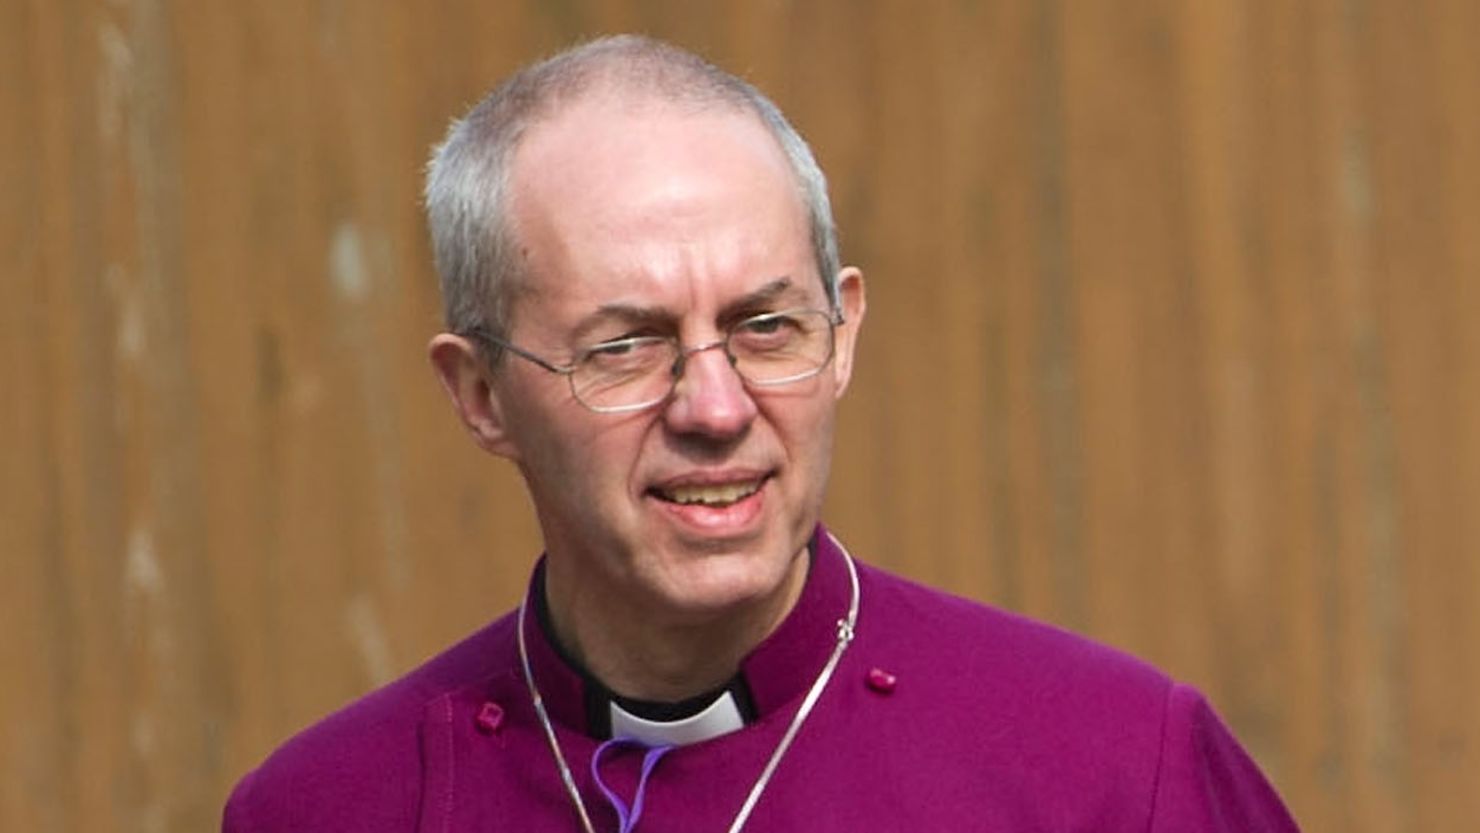 The Archbishop of Canterbury Justin Welby said the Church was "putting our money where our mouth is."